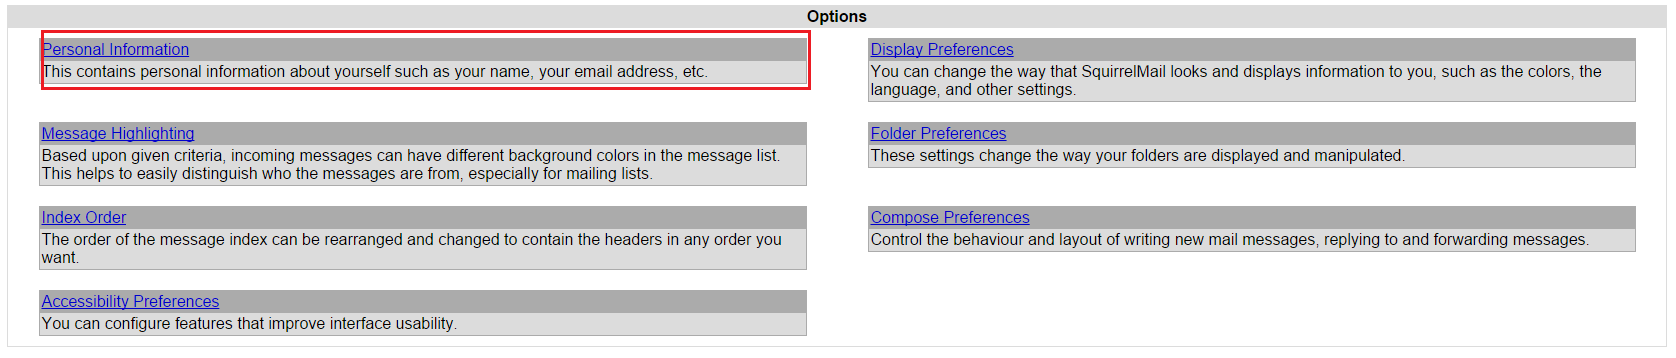 cpanel_-_how_to_change_the_time_zone_of_webmail_clients-squirrelmail_02